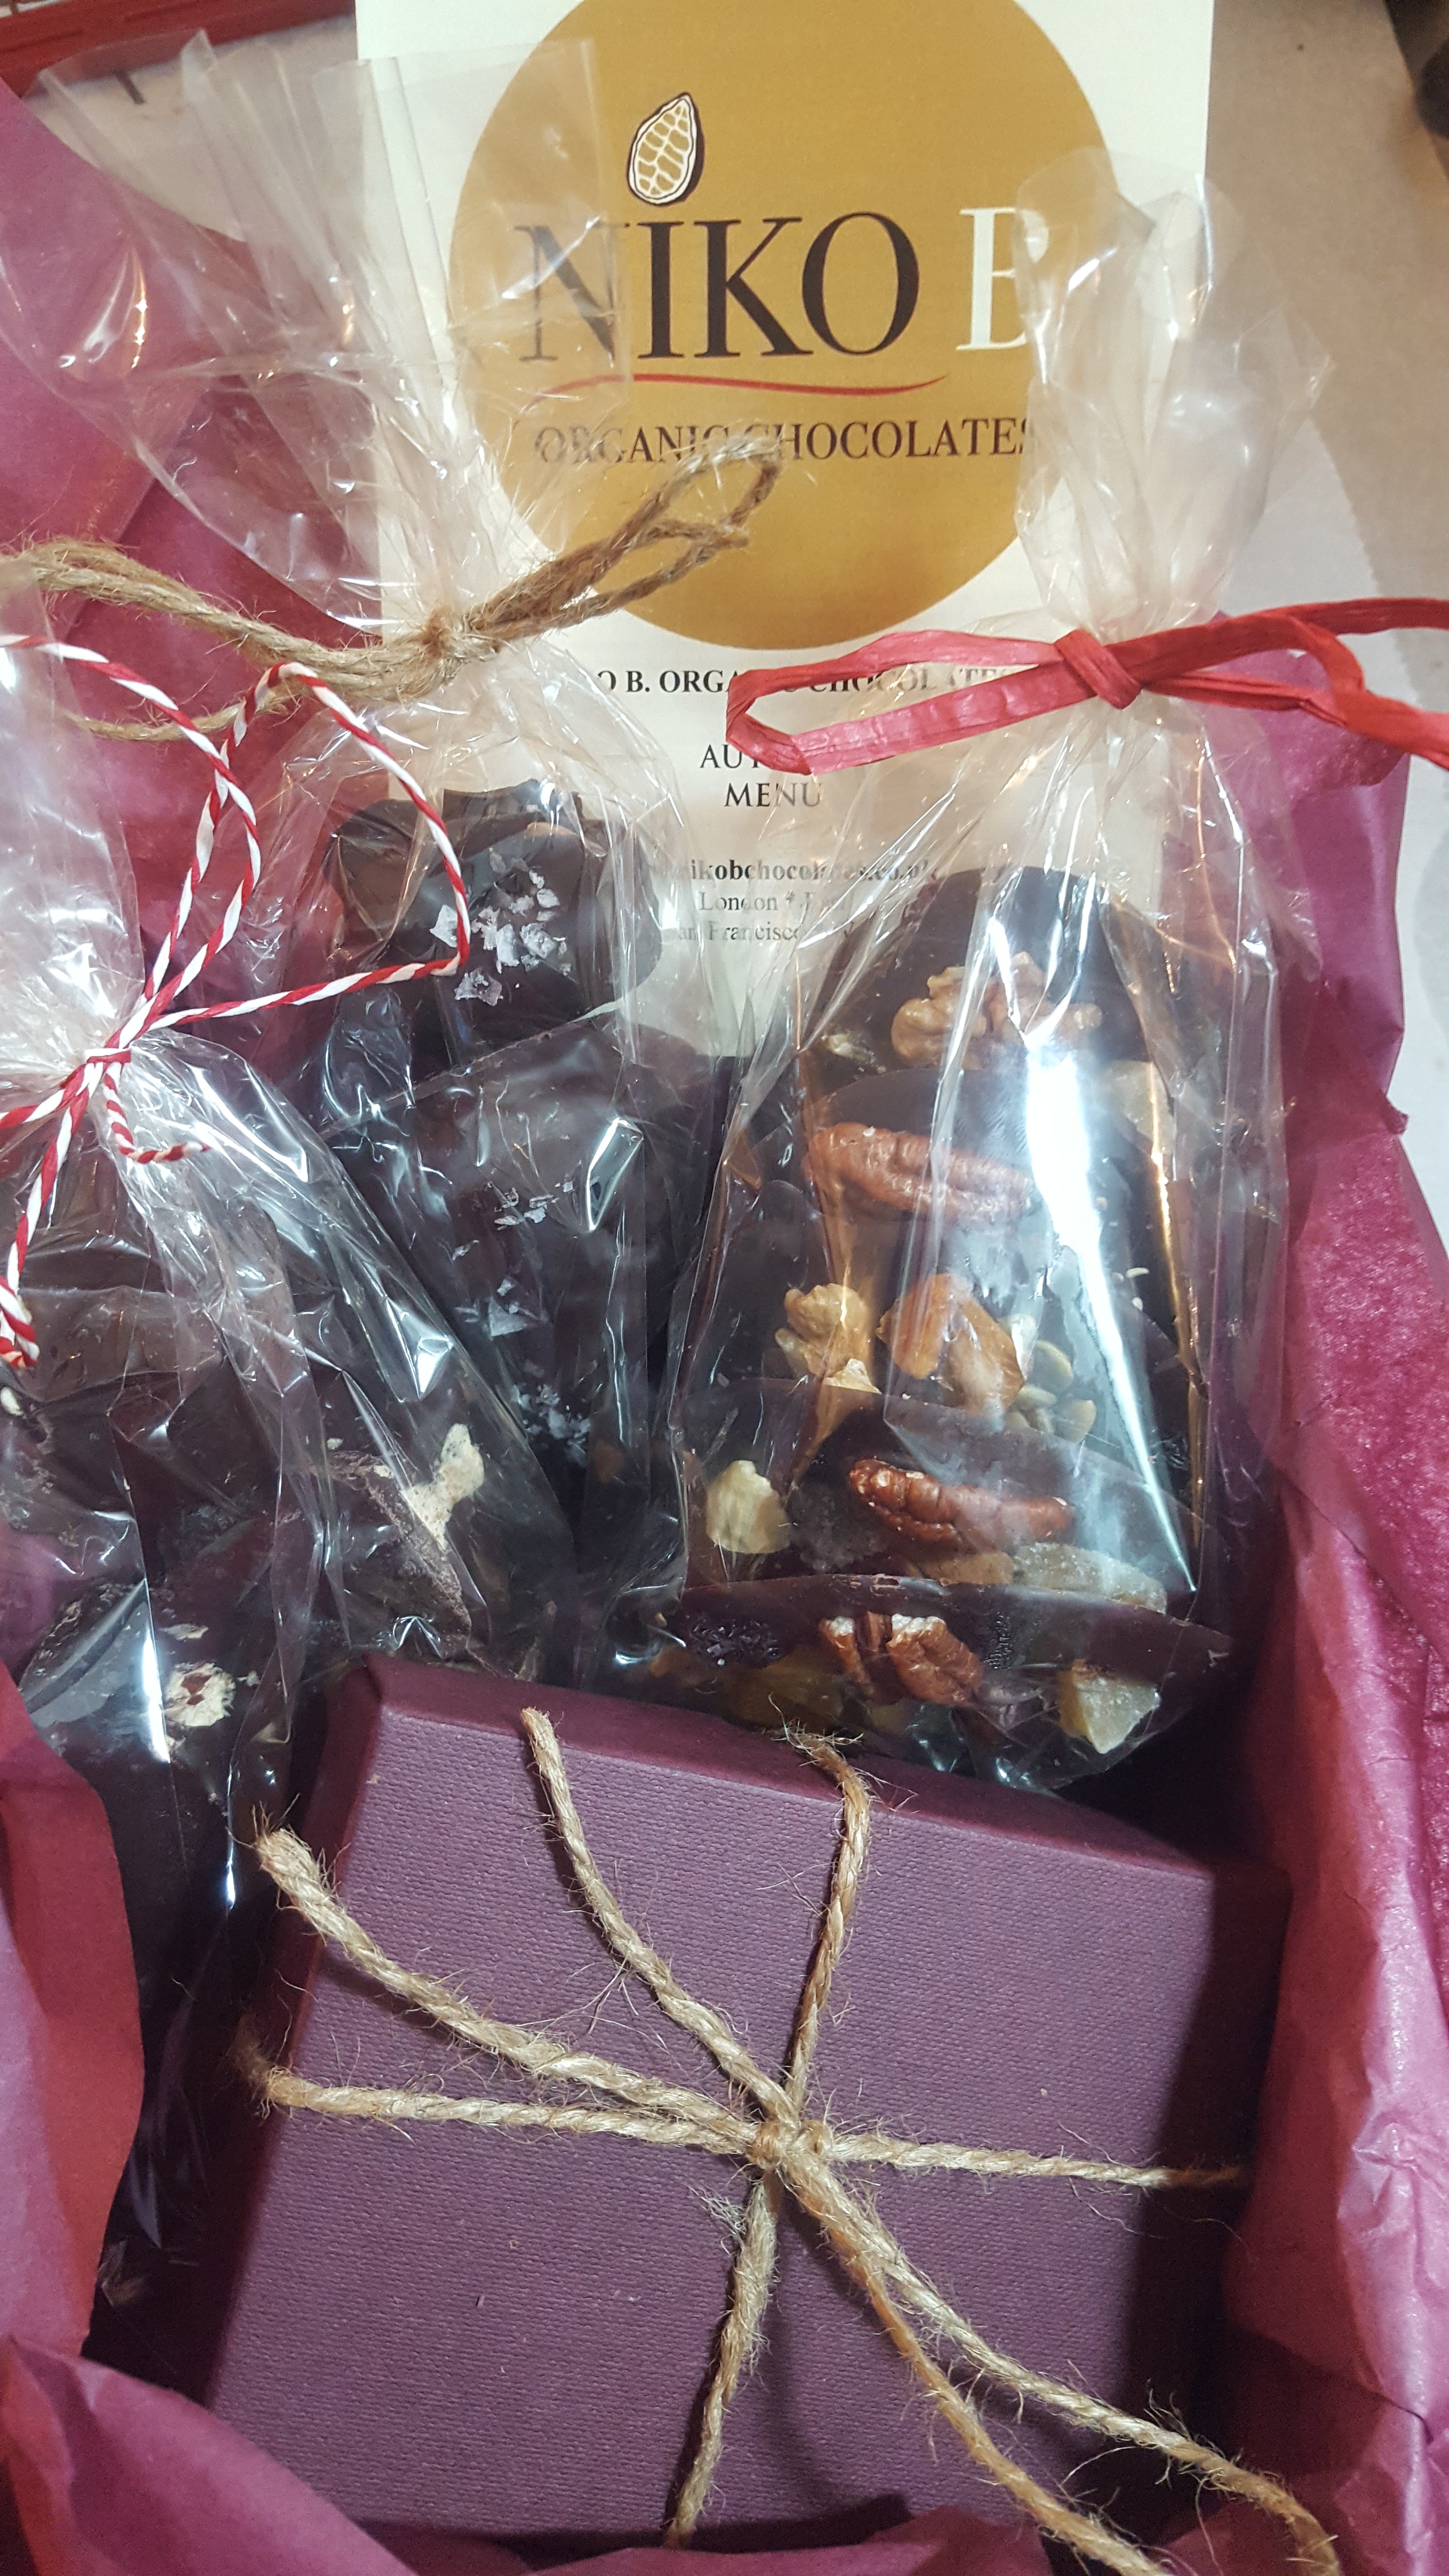 Salted Caramel Assortment Plus: Our Premium Gift Sets